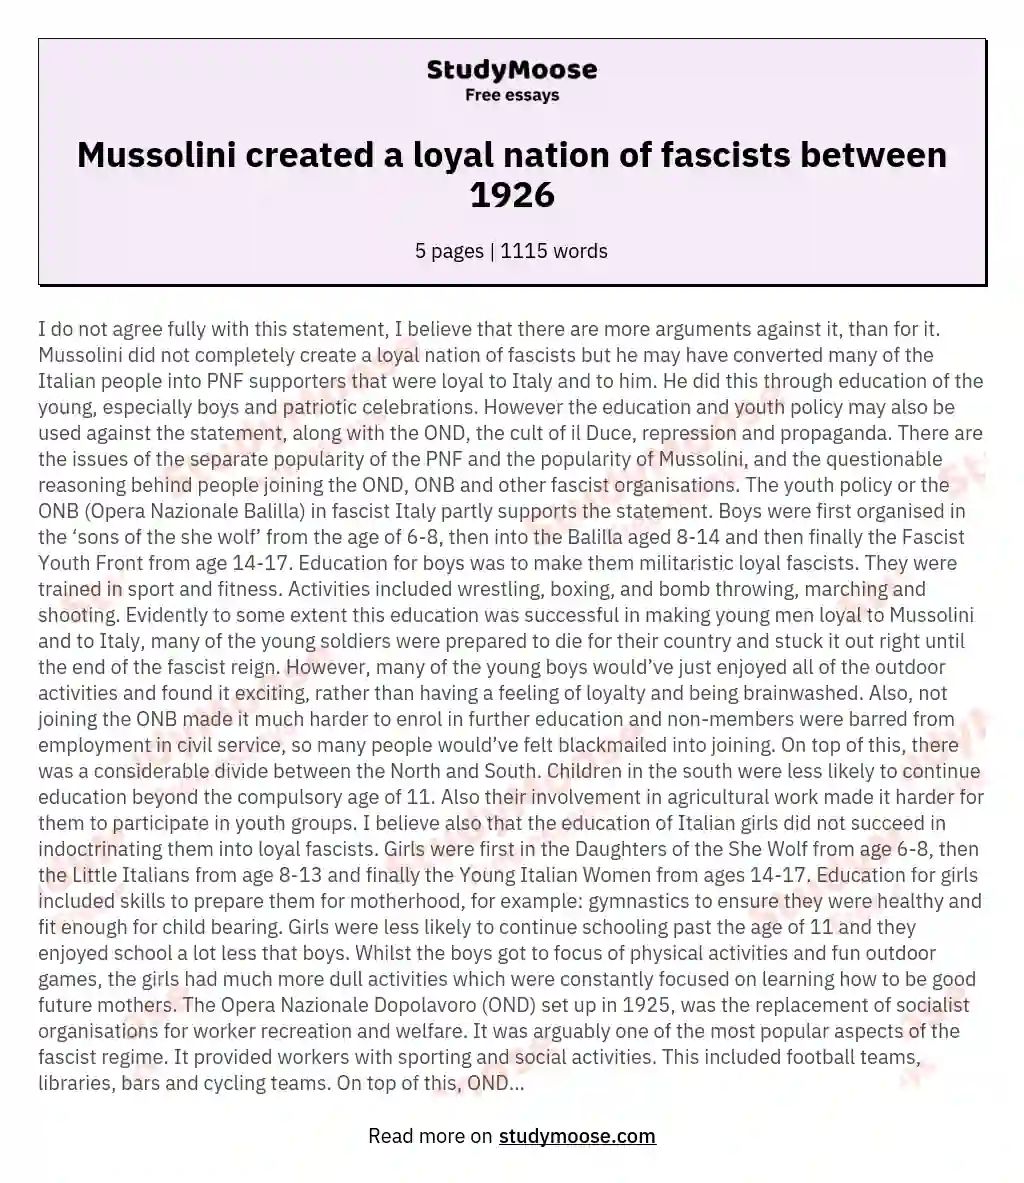 Mussolini created a loyal nation of fascists between 1926 essay